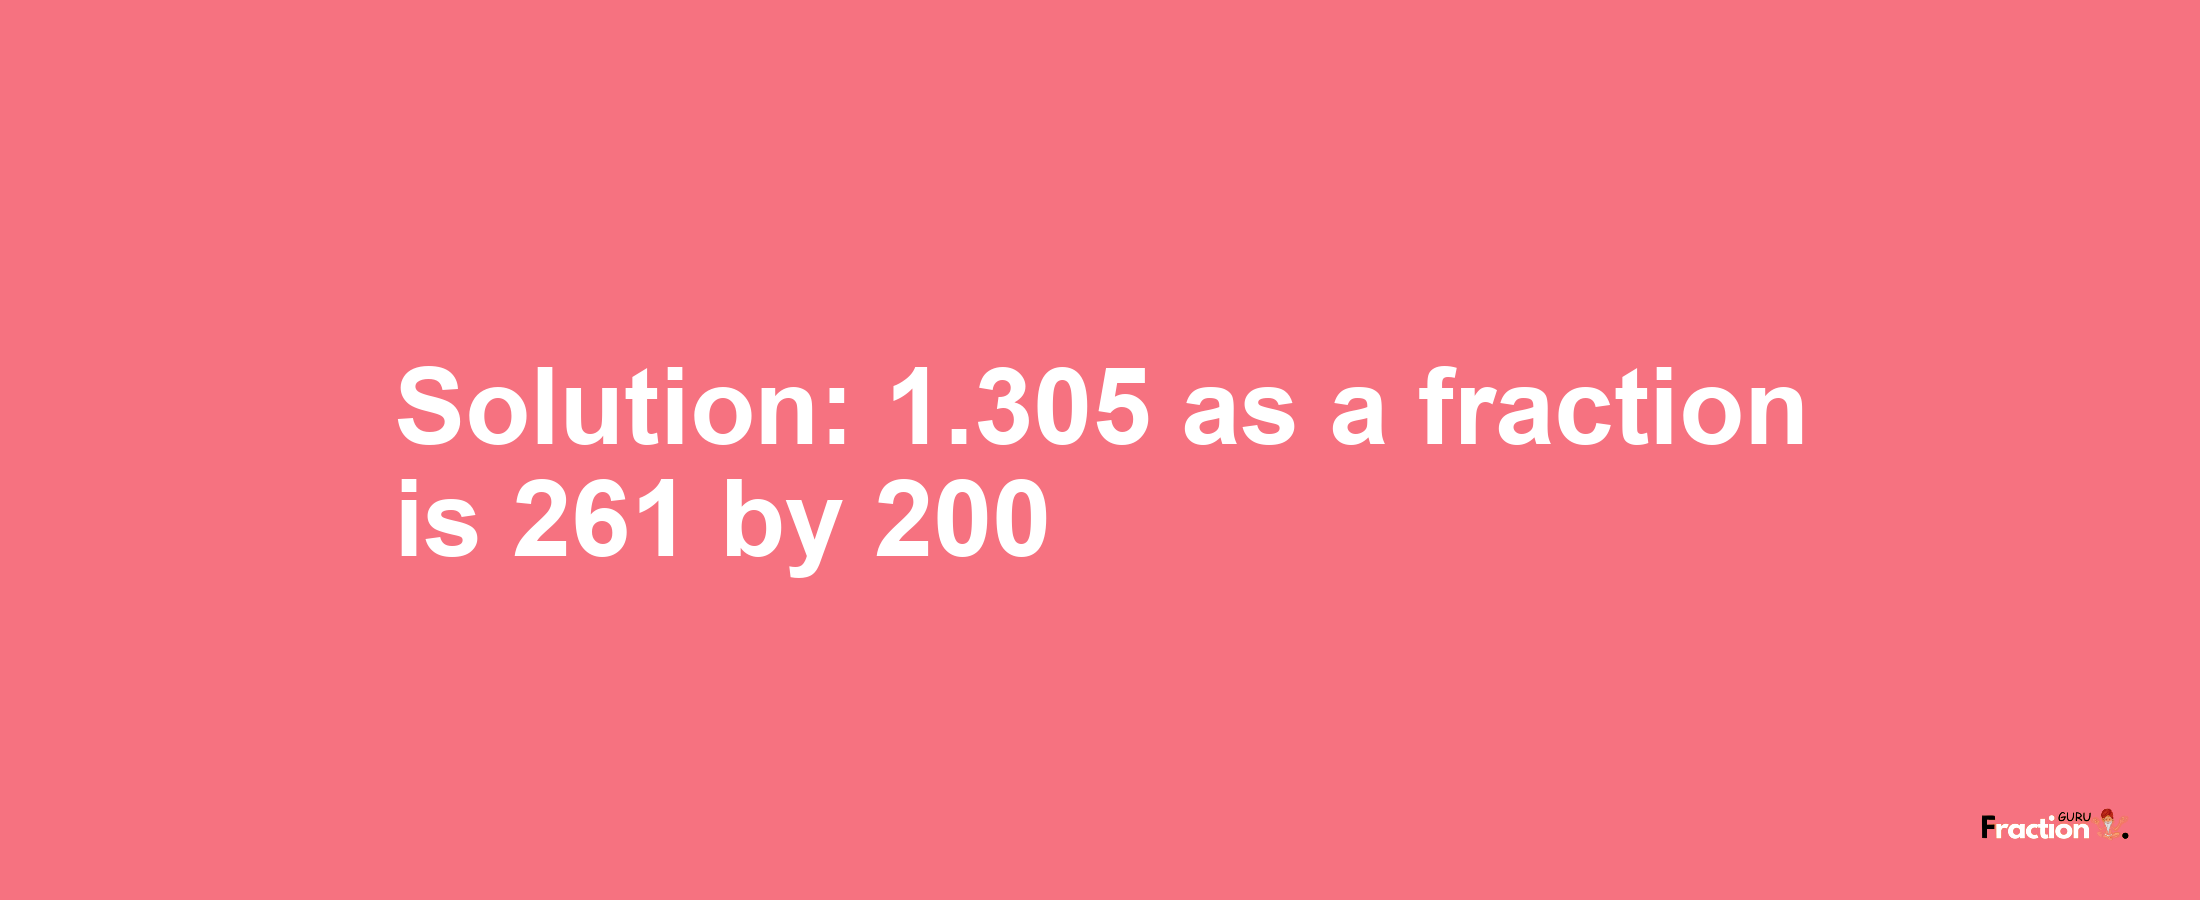 Solution:1.305 as a fraction is 261/200